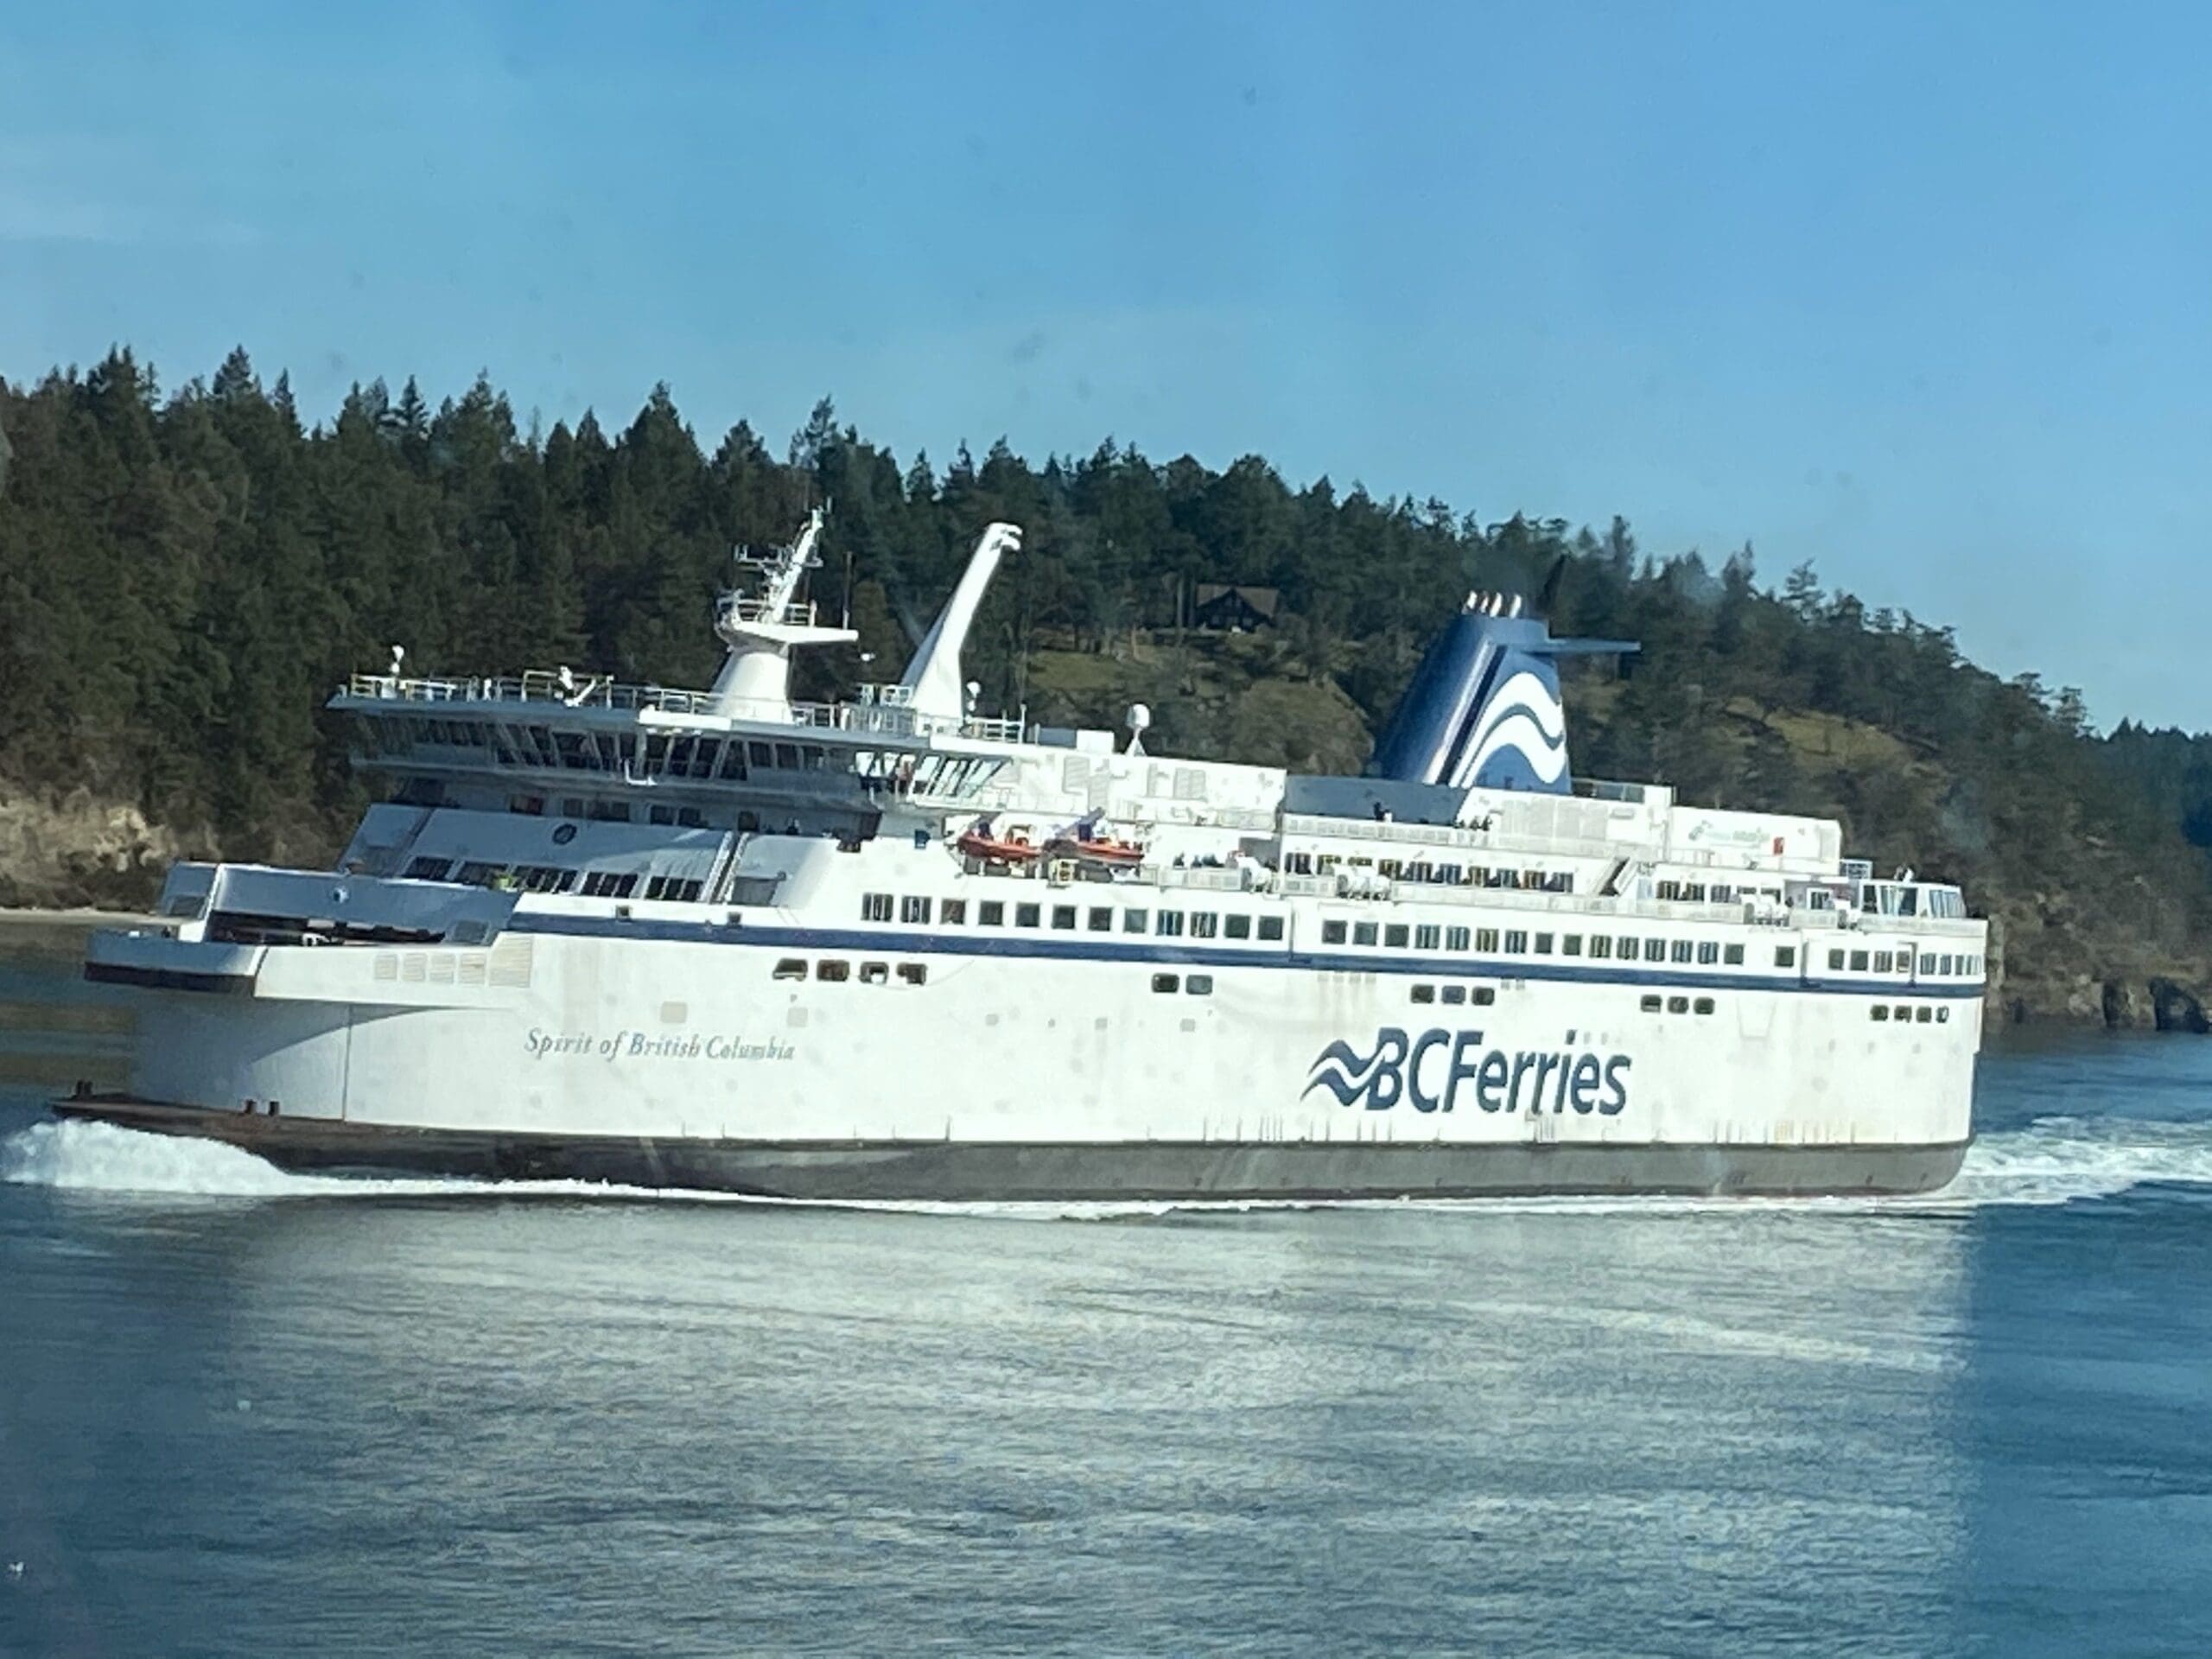 BC Ferries is used by many people to go from the mainland to Victoria on a regular basis.  It's also used to travel from and to Victoria from the smaller islands.